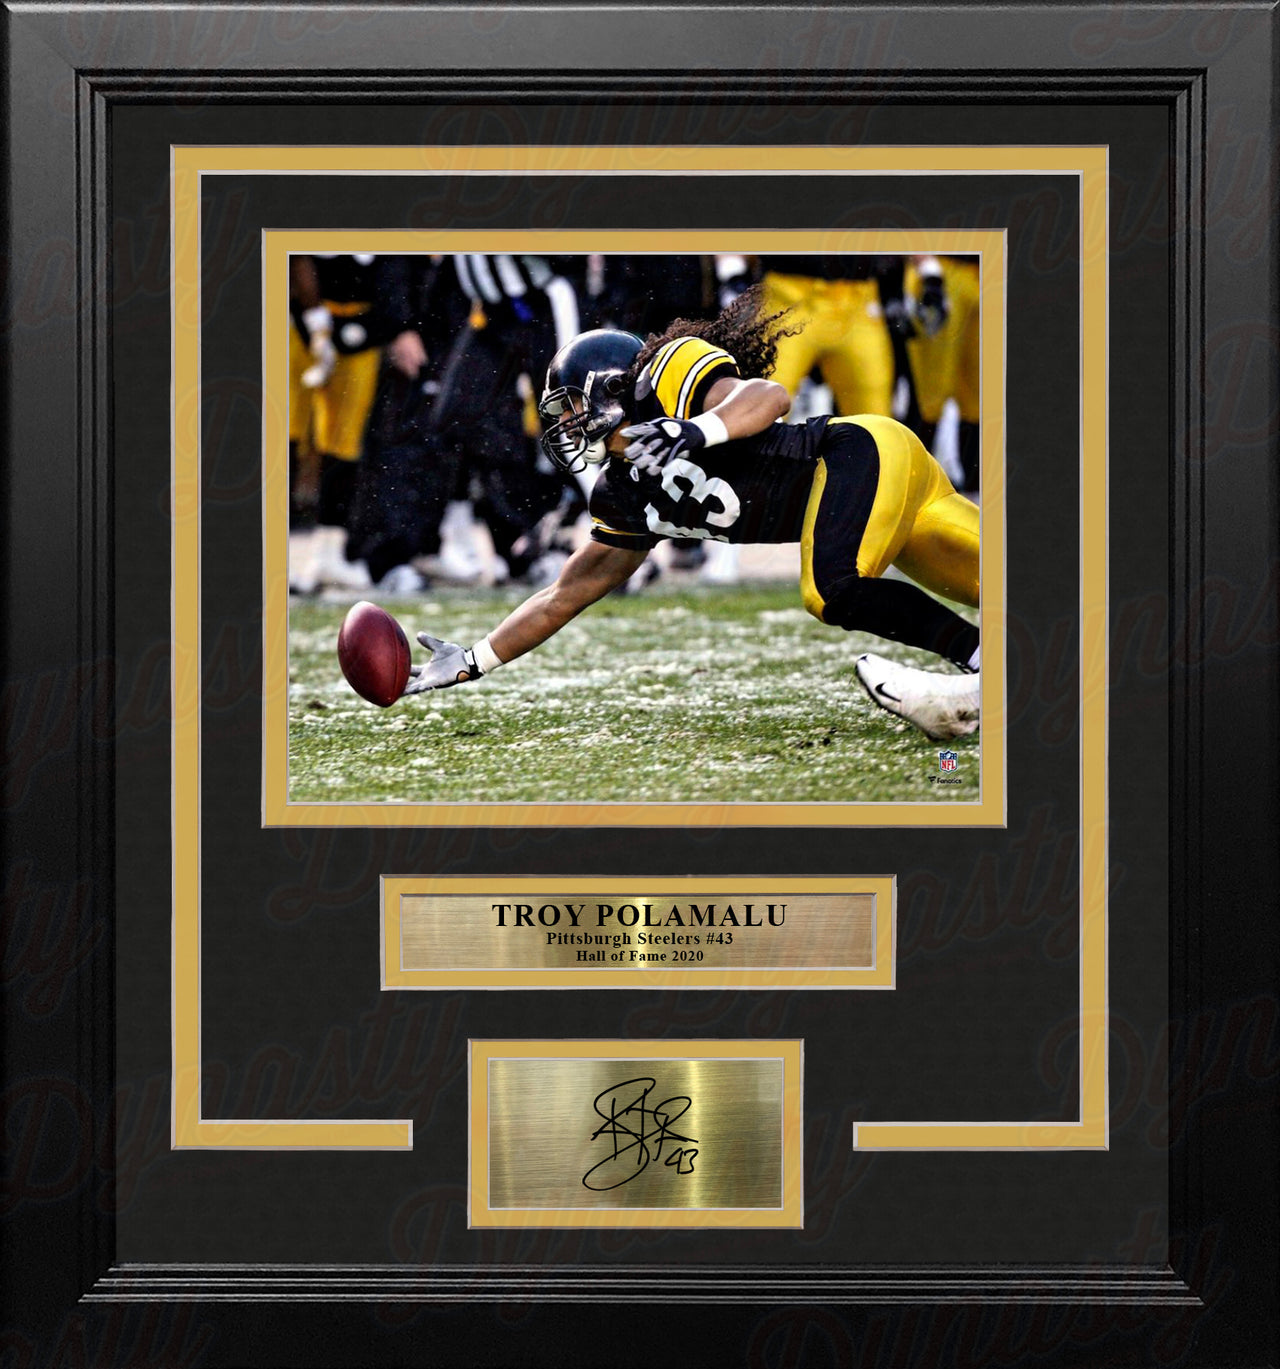 Troy Polamalu Fingertip Catch Pittsburgh Steelers 8" x 10" Framed Football Photo with Engraved Autograph